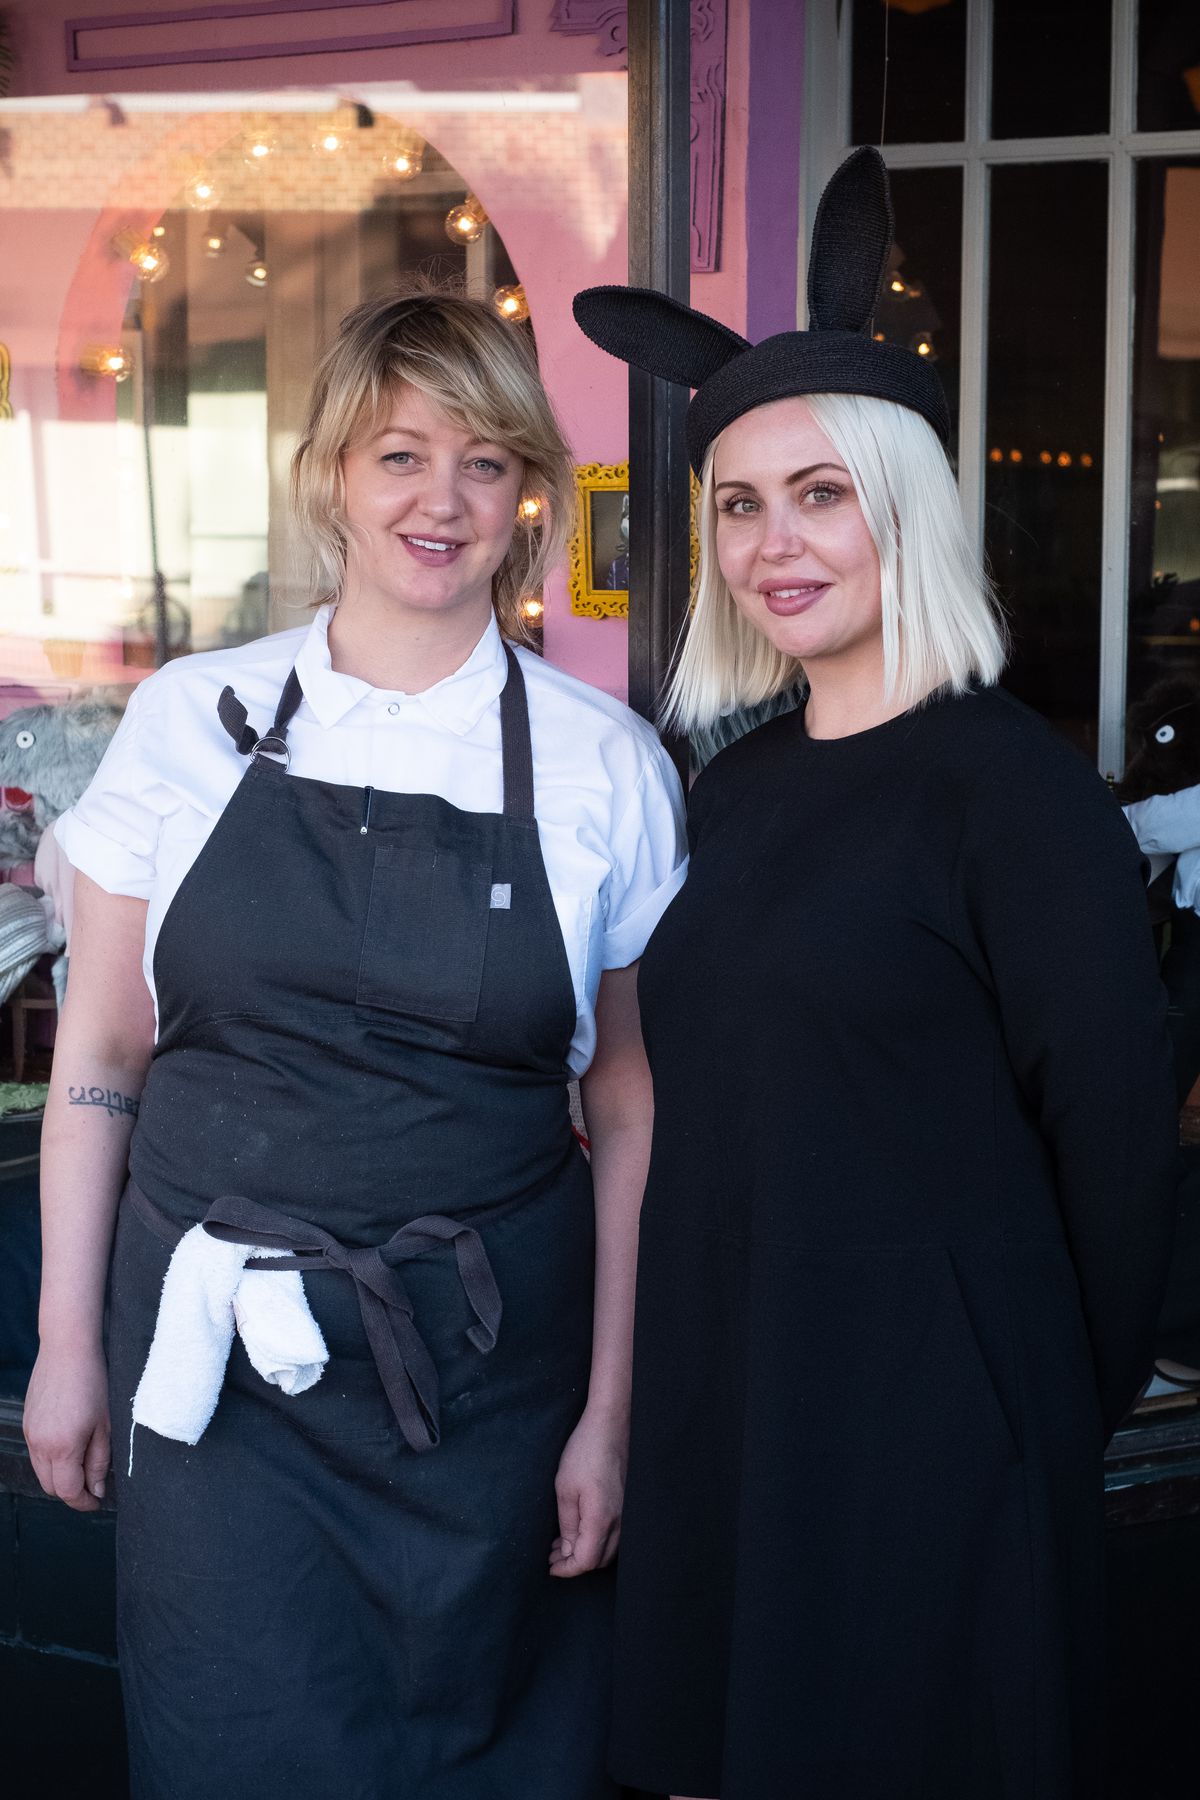 Chef Jamie Malone and Nikki Klocker outside Grand Cafe. Jamie wears an apron with a white towel tucked at the waist. Klocker wears a black sheath dress and a rabbit-eared chic hat